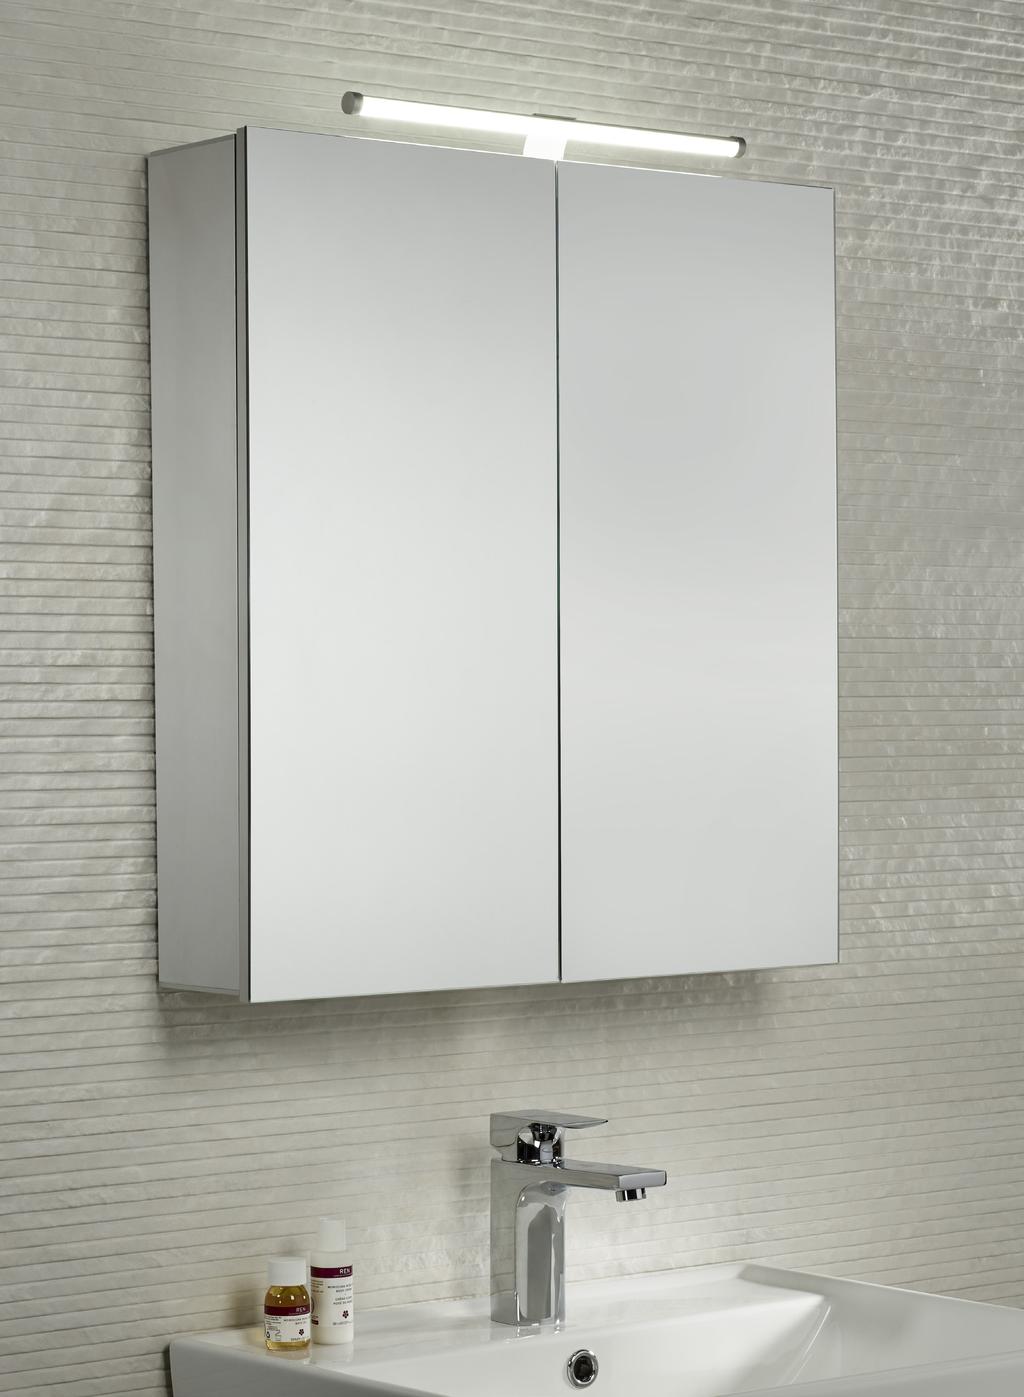 With its overhead energy saving led lighting, soft close mirror doors and plenty of